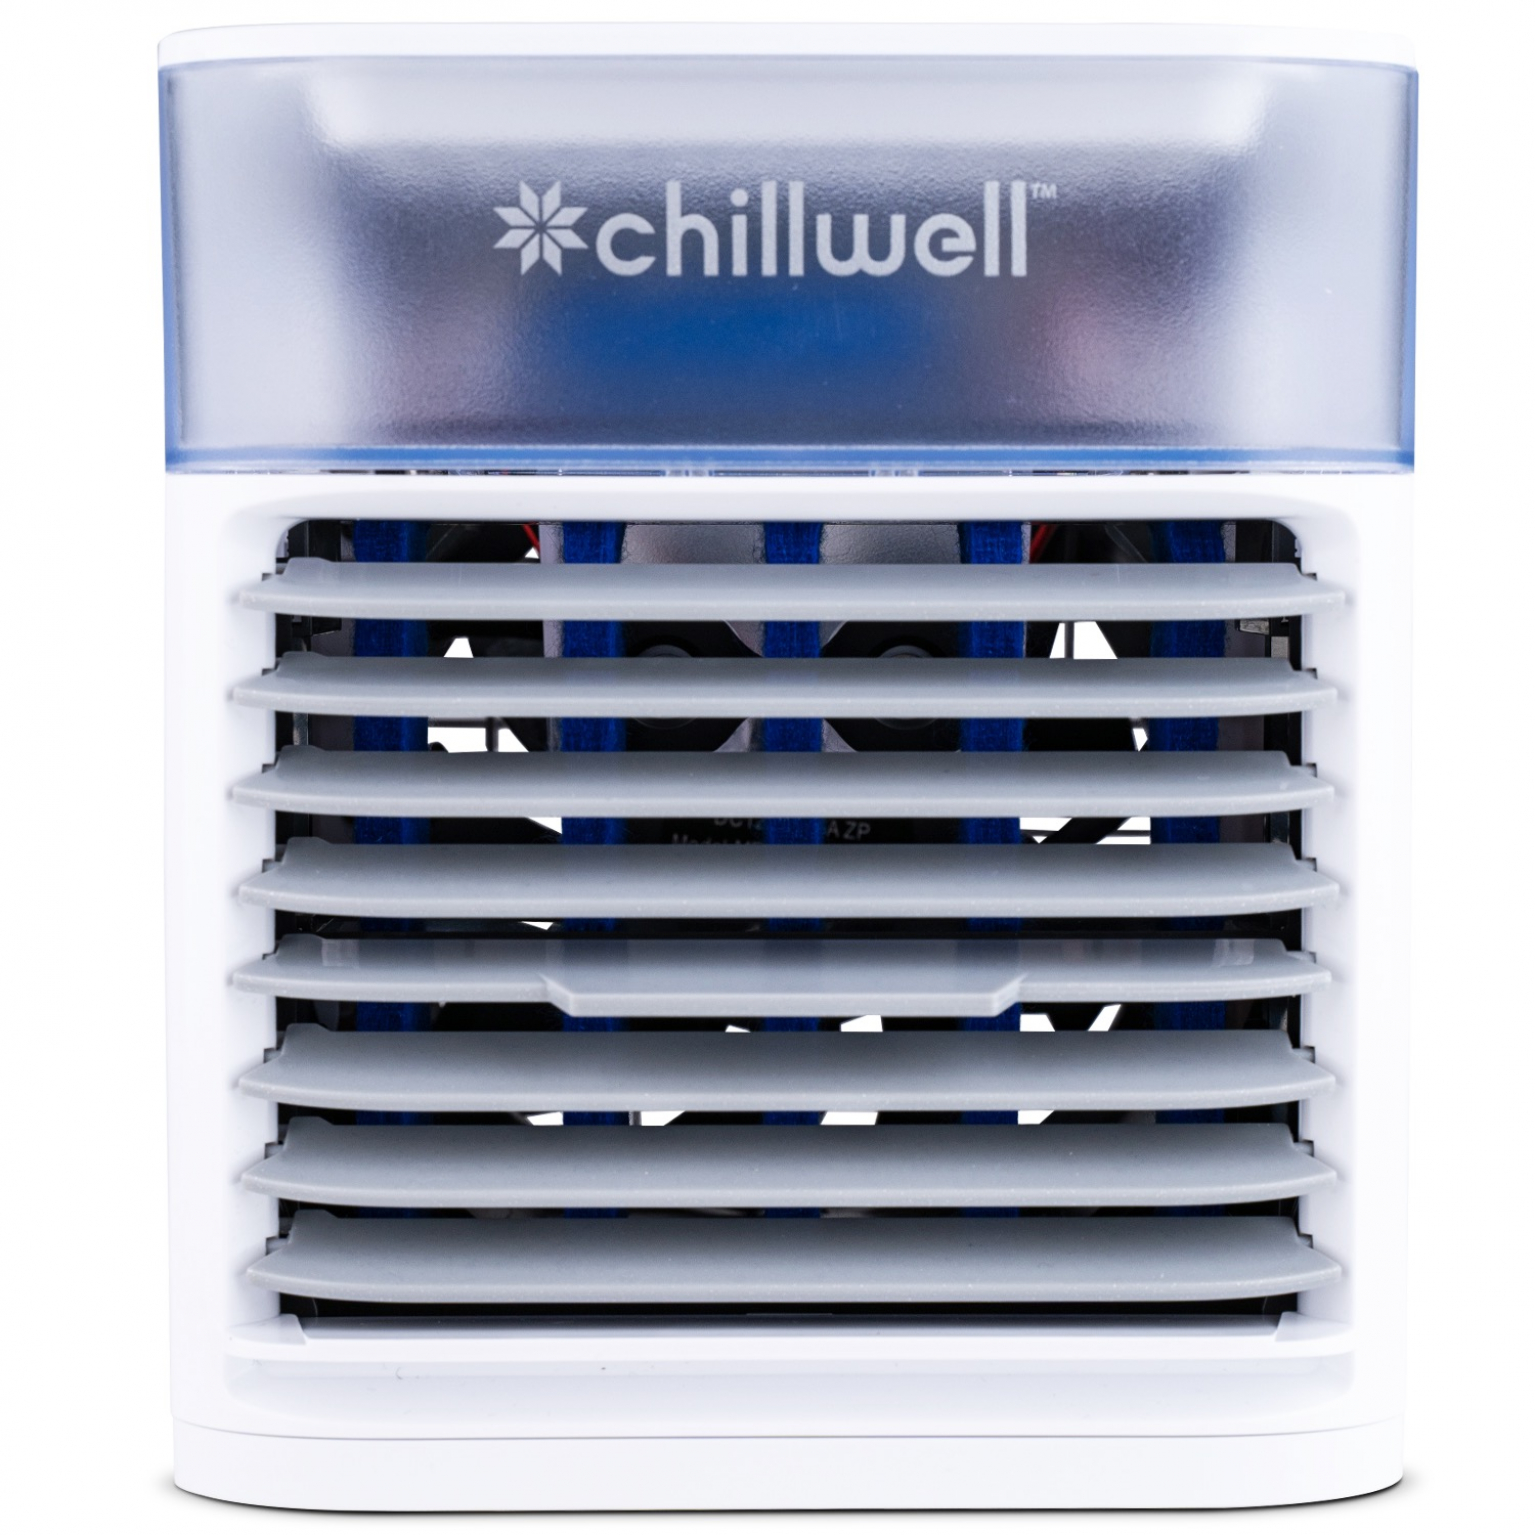 Chillwell Ac Bad Reviews